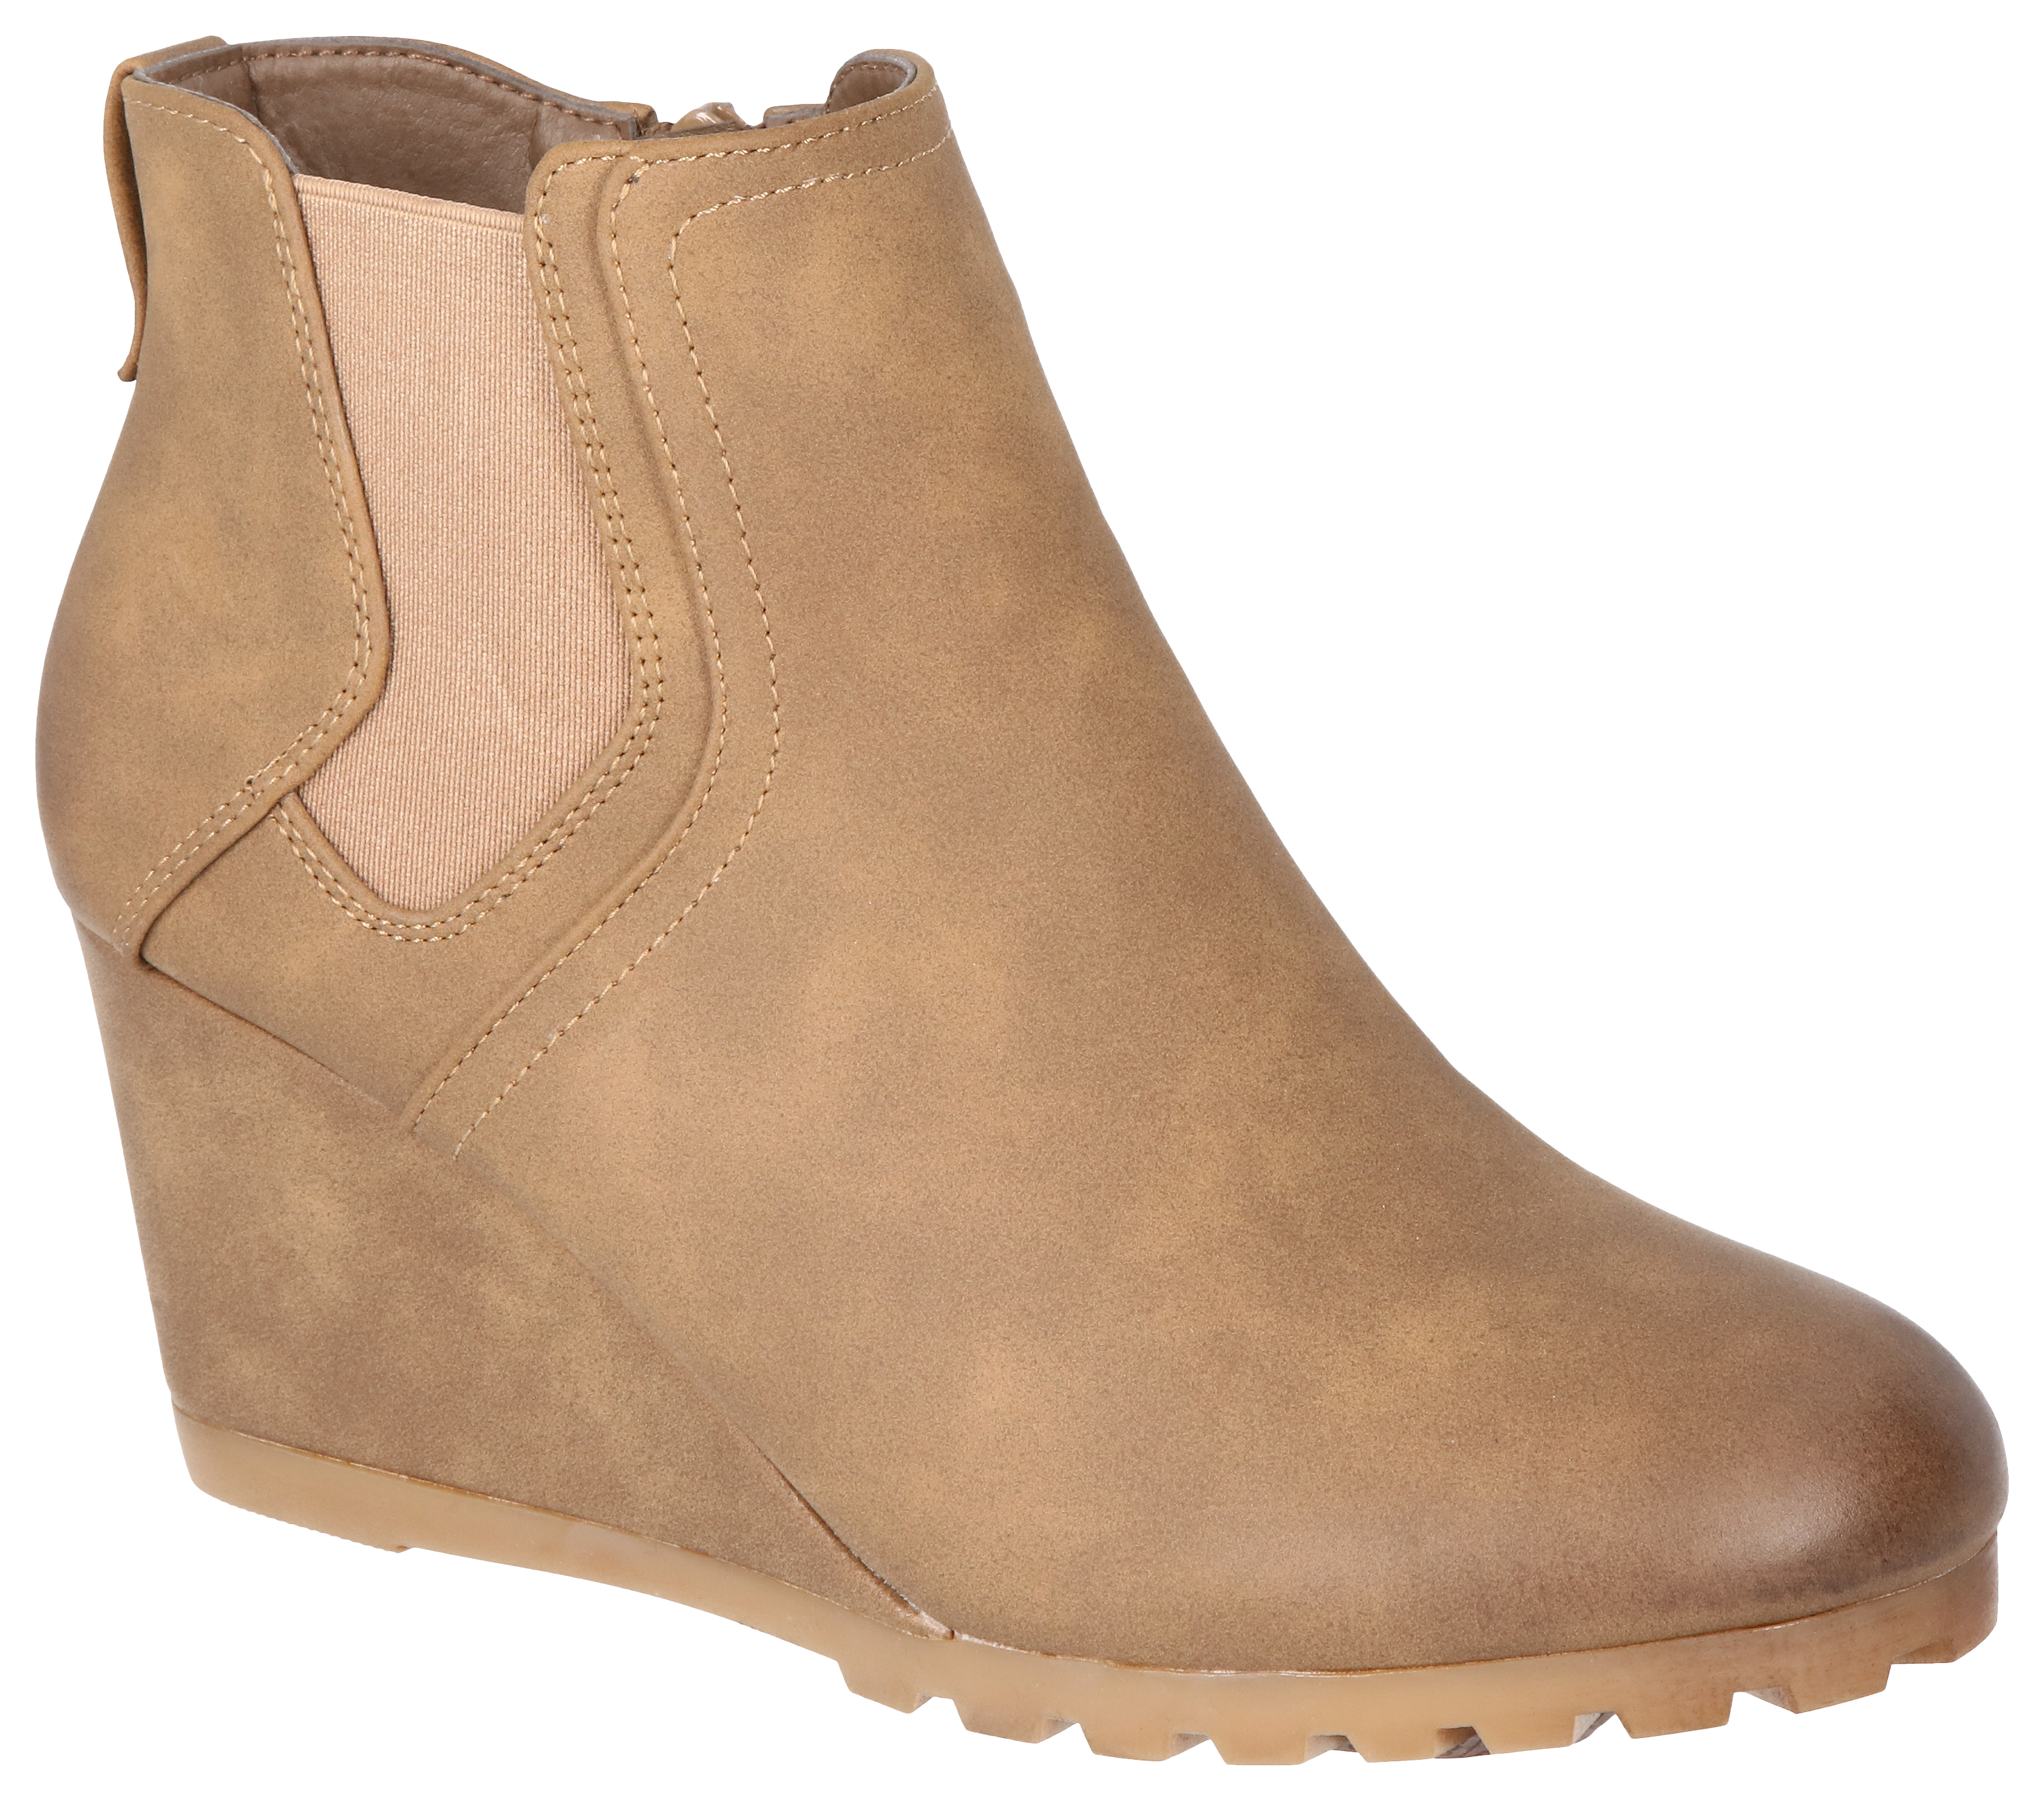 Natural Reflections Trista Rugged Boots for Ladies - Taupe - 10M